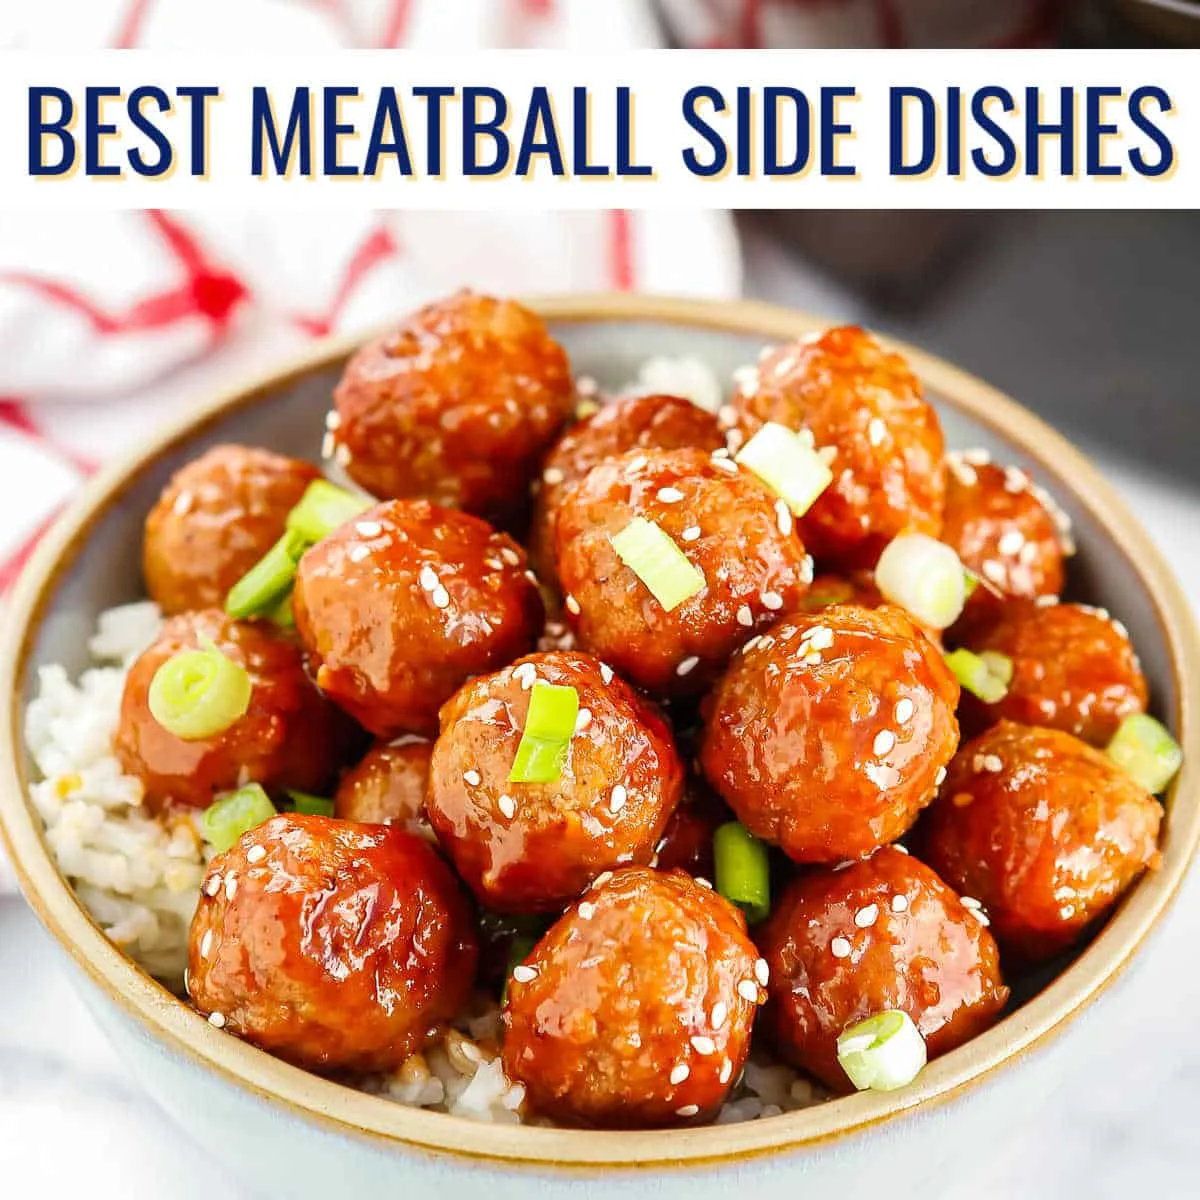 bowl of meatballs with text "best meatball side dishes"